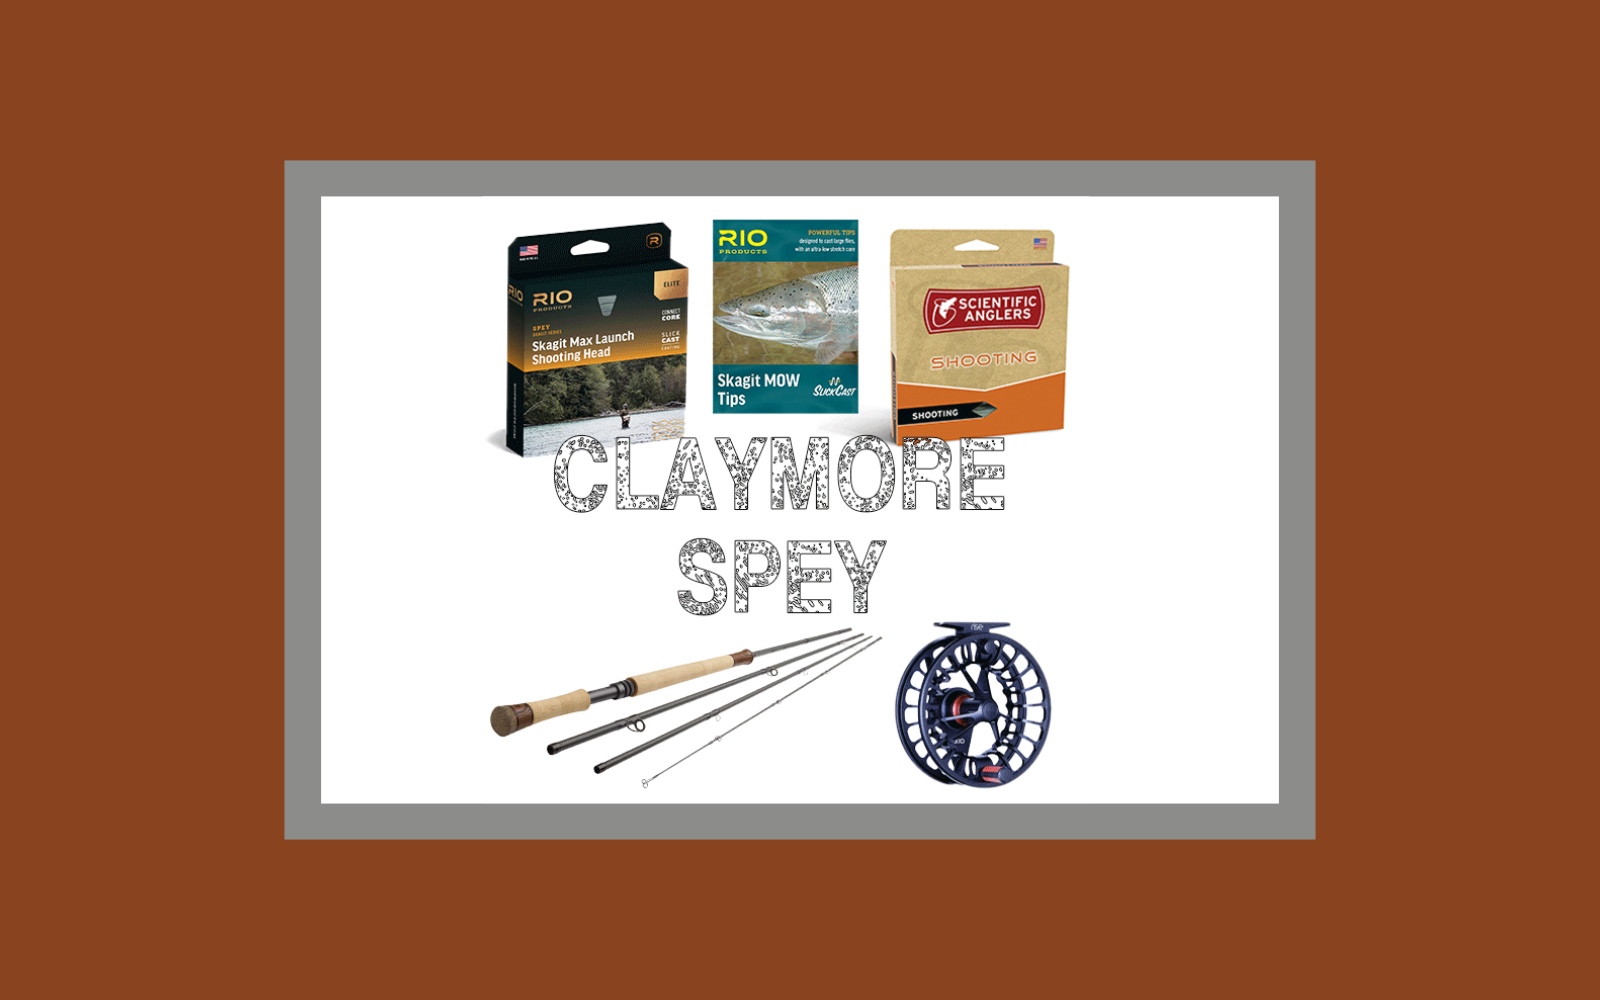 The Ashland Fly Shop - Fly Fishing Gear, Equipment, Flies & Tackle